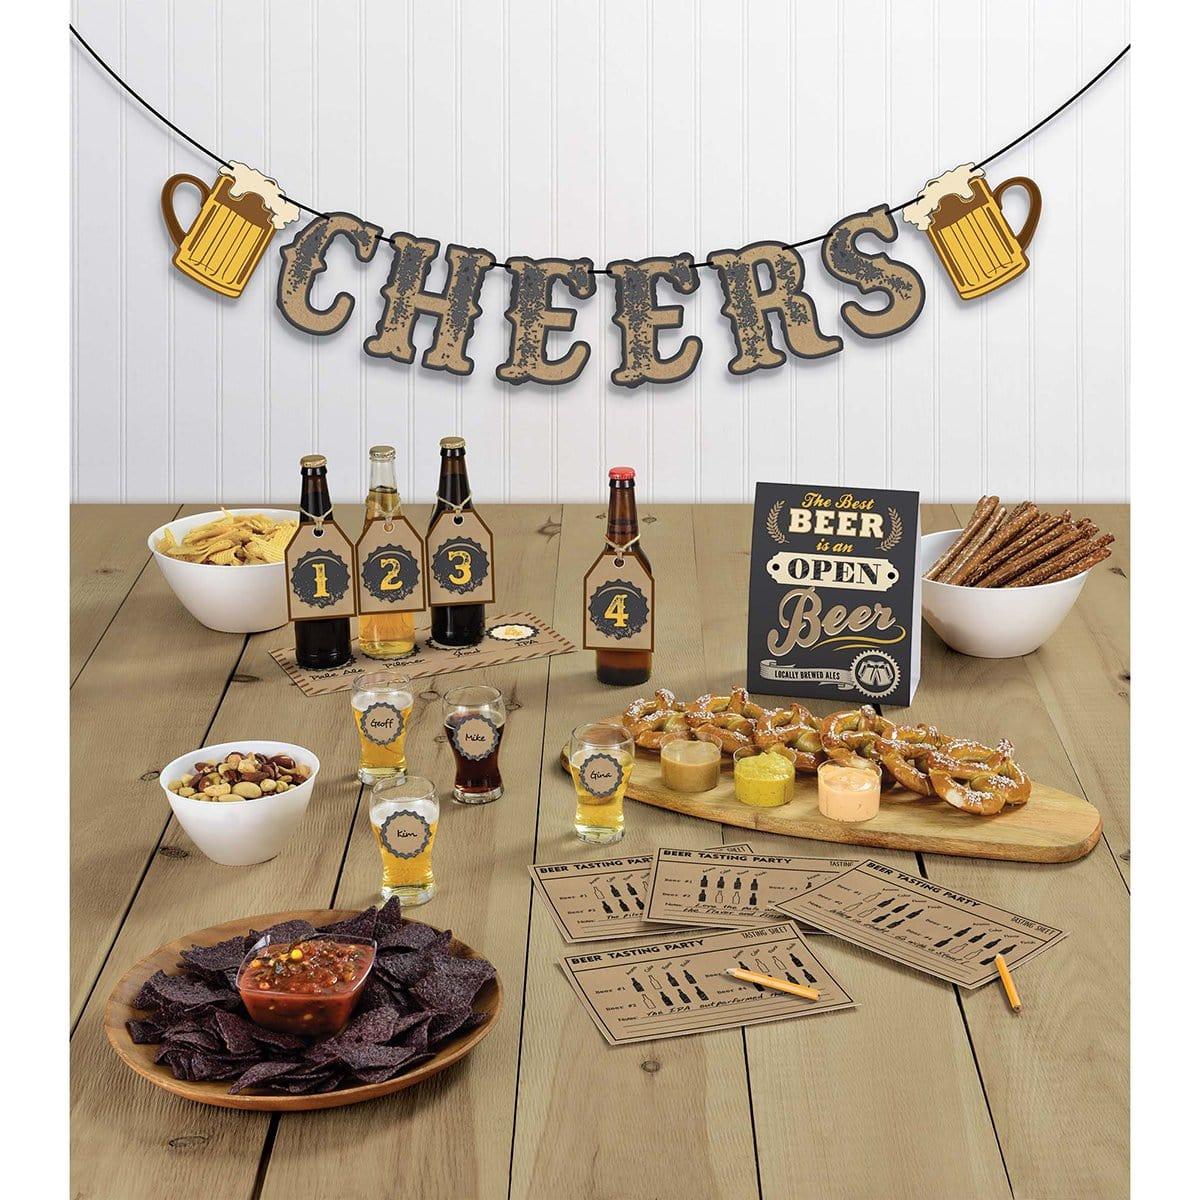 Buy Everyday Entertaining Cheers & Beers Decorating Kit sold at Party Expert